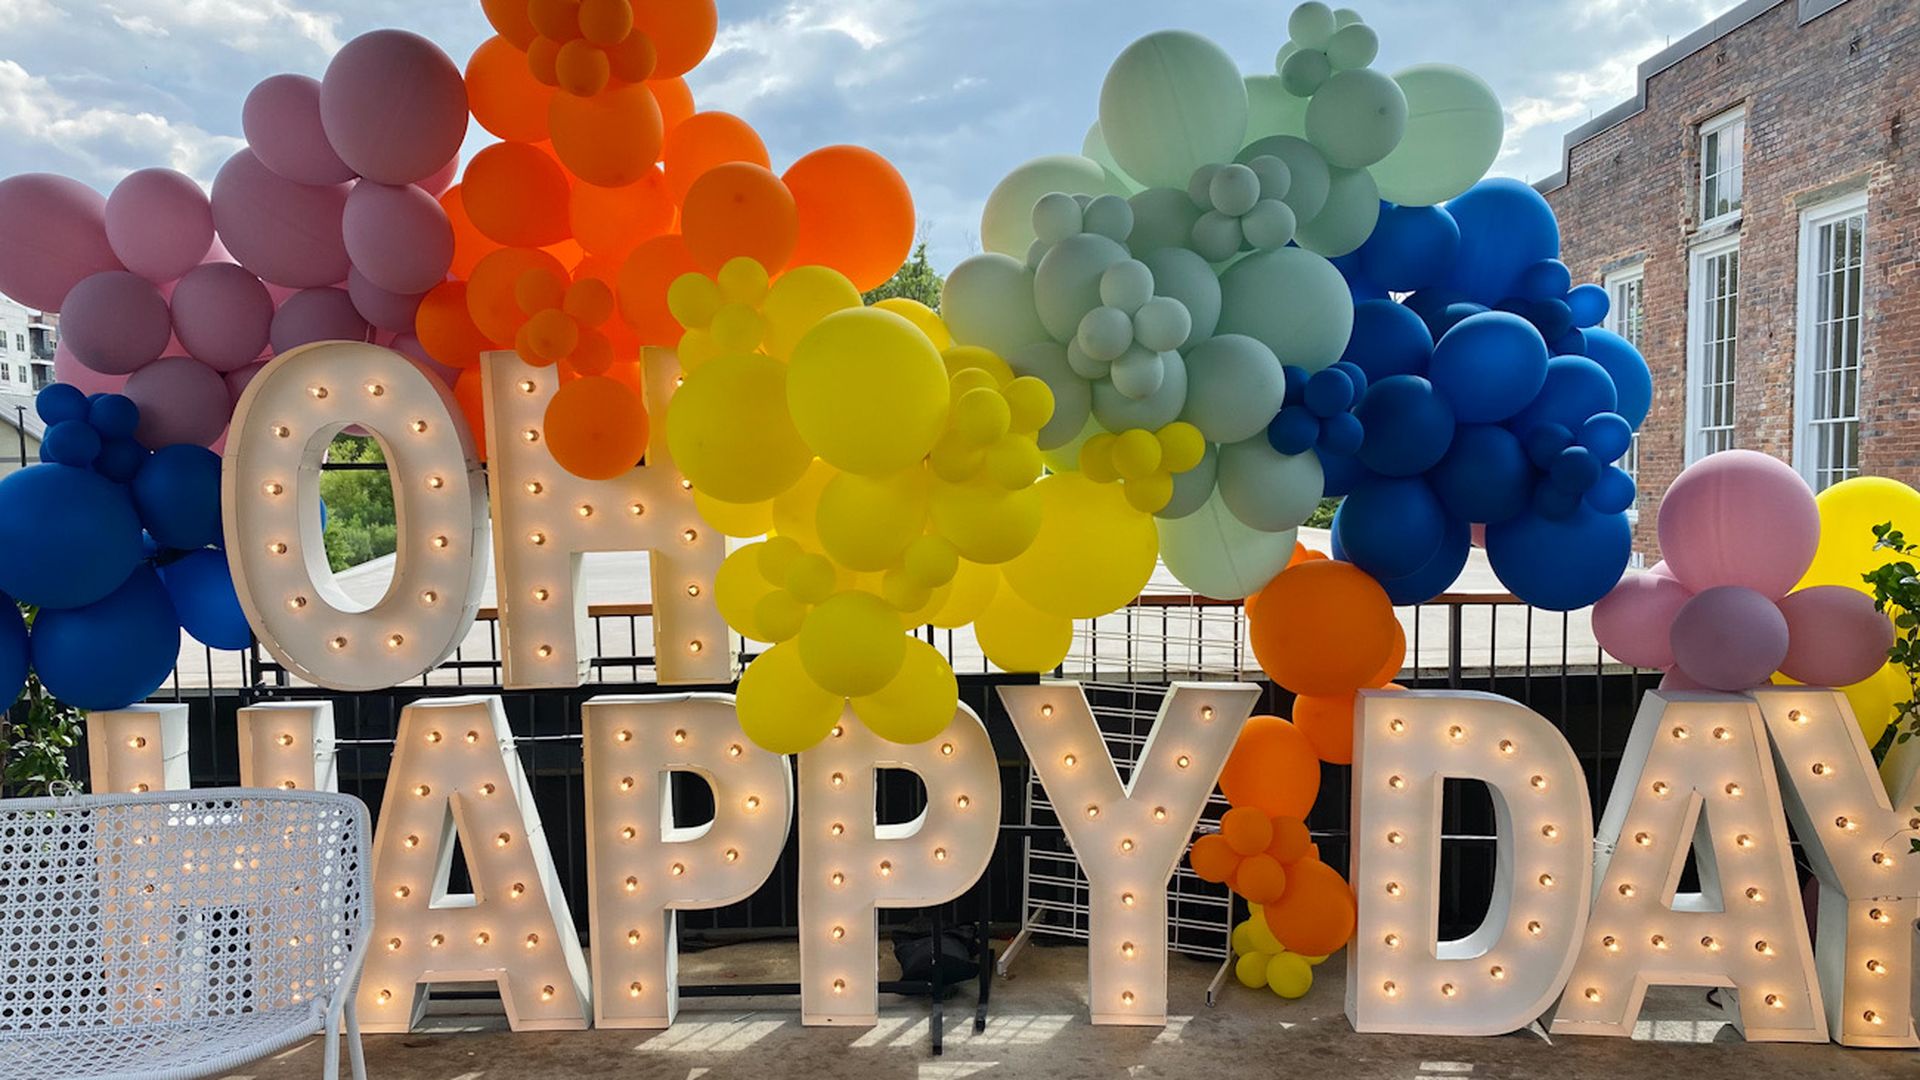 "Oh Happy Days" sign surrounded by balloons. Photo: Symphony Webber/Axios